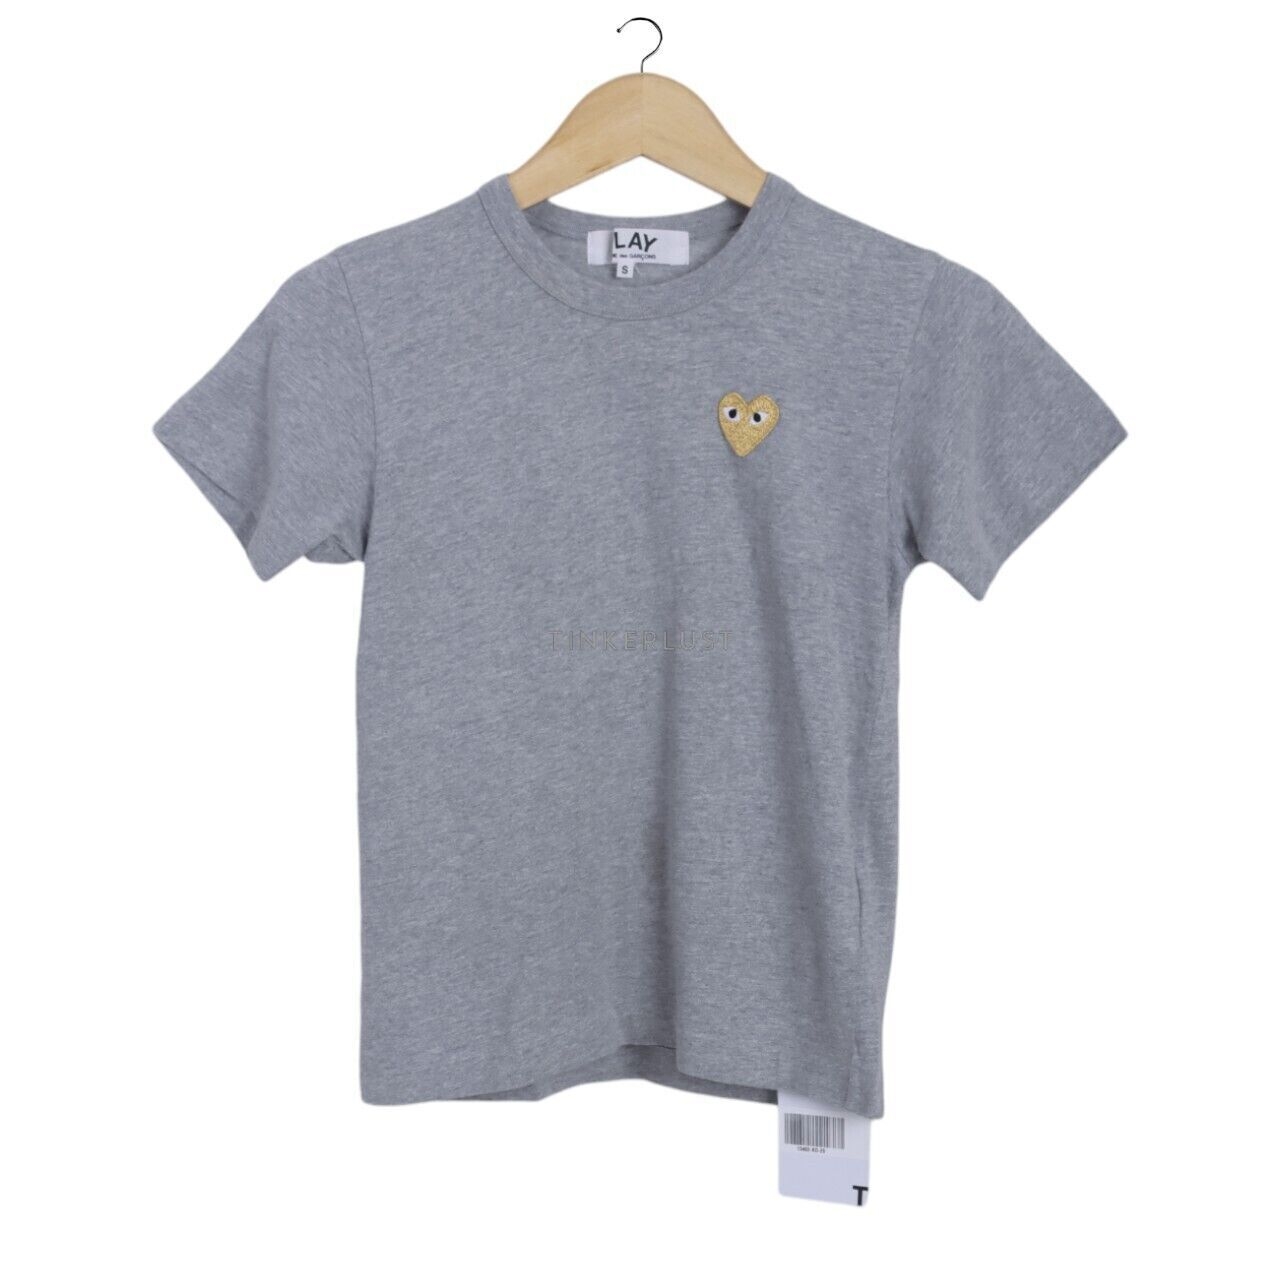 Play Comme des Garcons Gold Heart Grey Tshirt